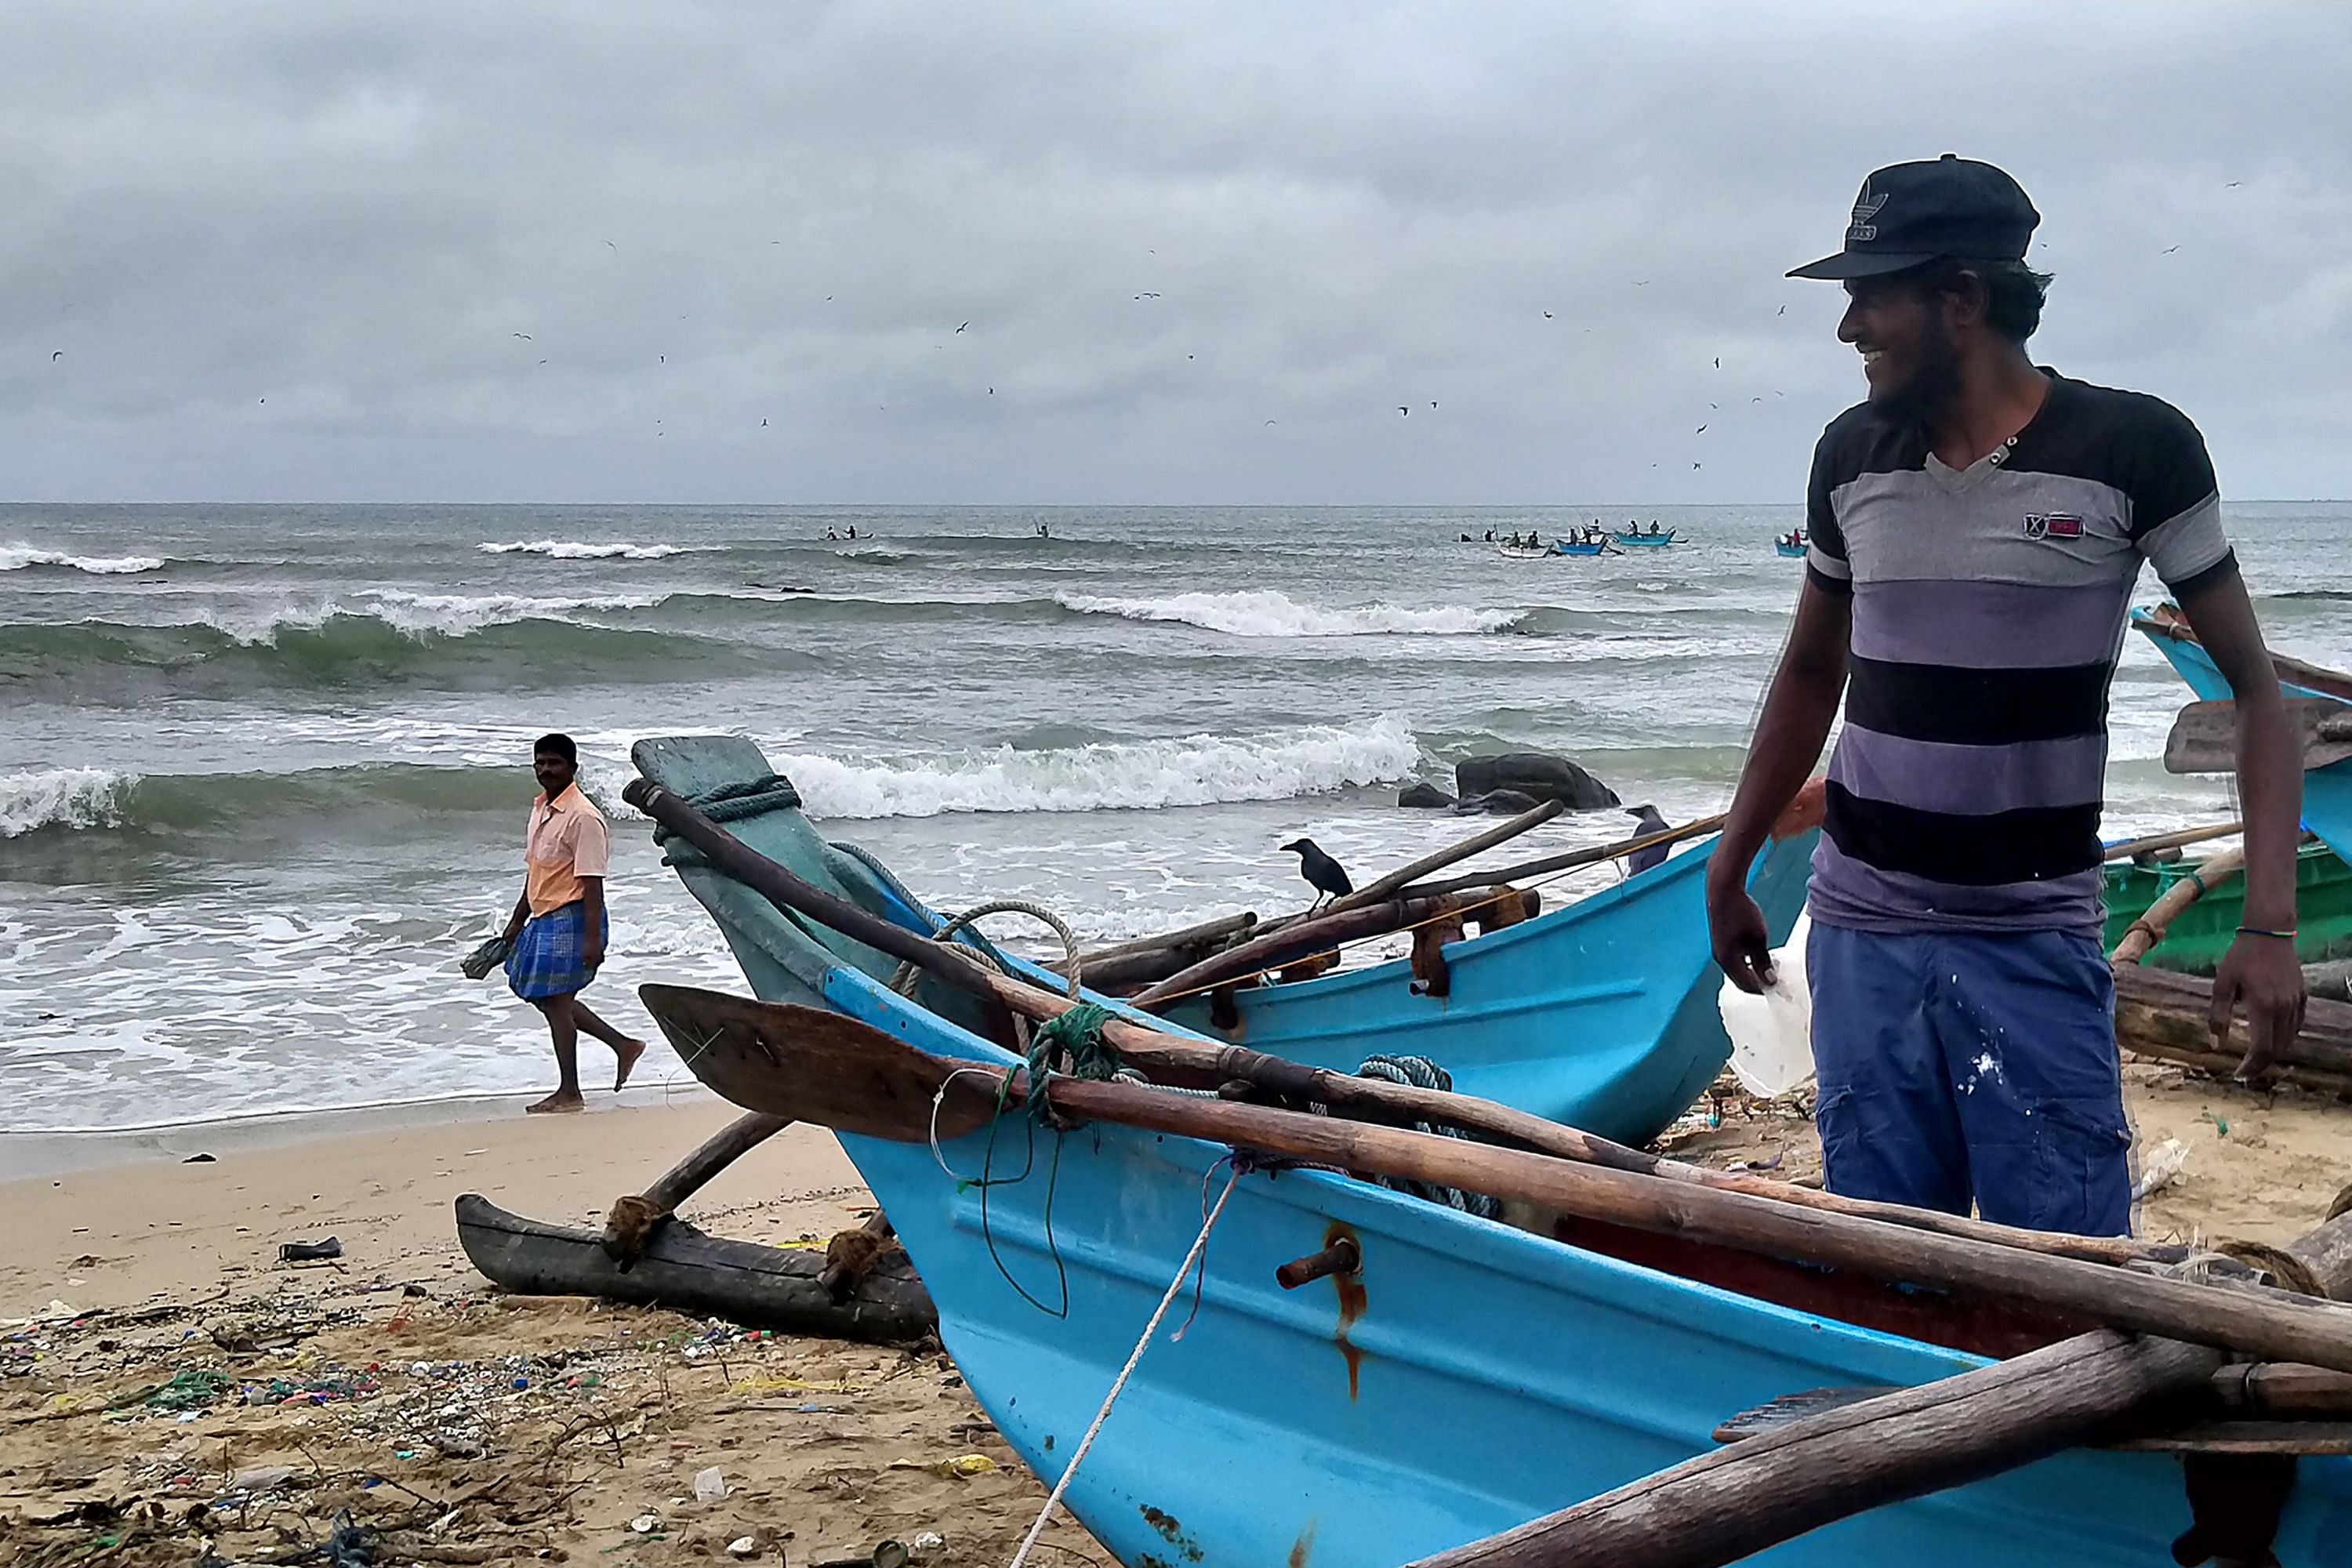 Fishermen prepare to go out in sea in Trincomalee on December 3, 2020. - Cyclone Burevi hit Sri Lanka overnight, rattling the island nation but leaving it relatively unscathed on its way to southern India, officials said on December 3. Credit: AFP Photo